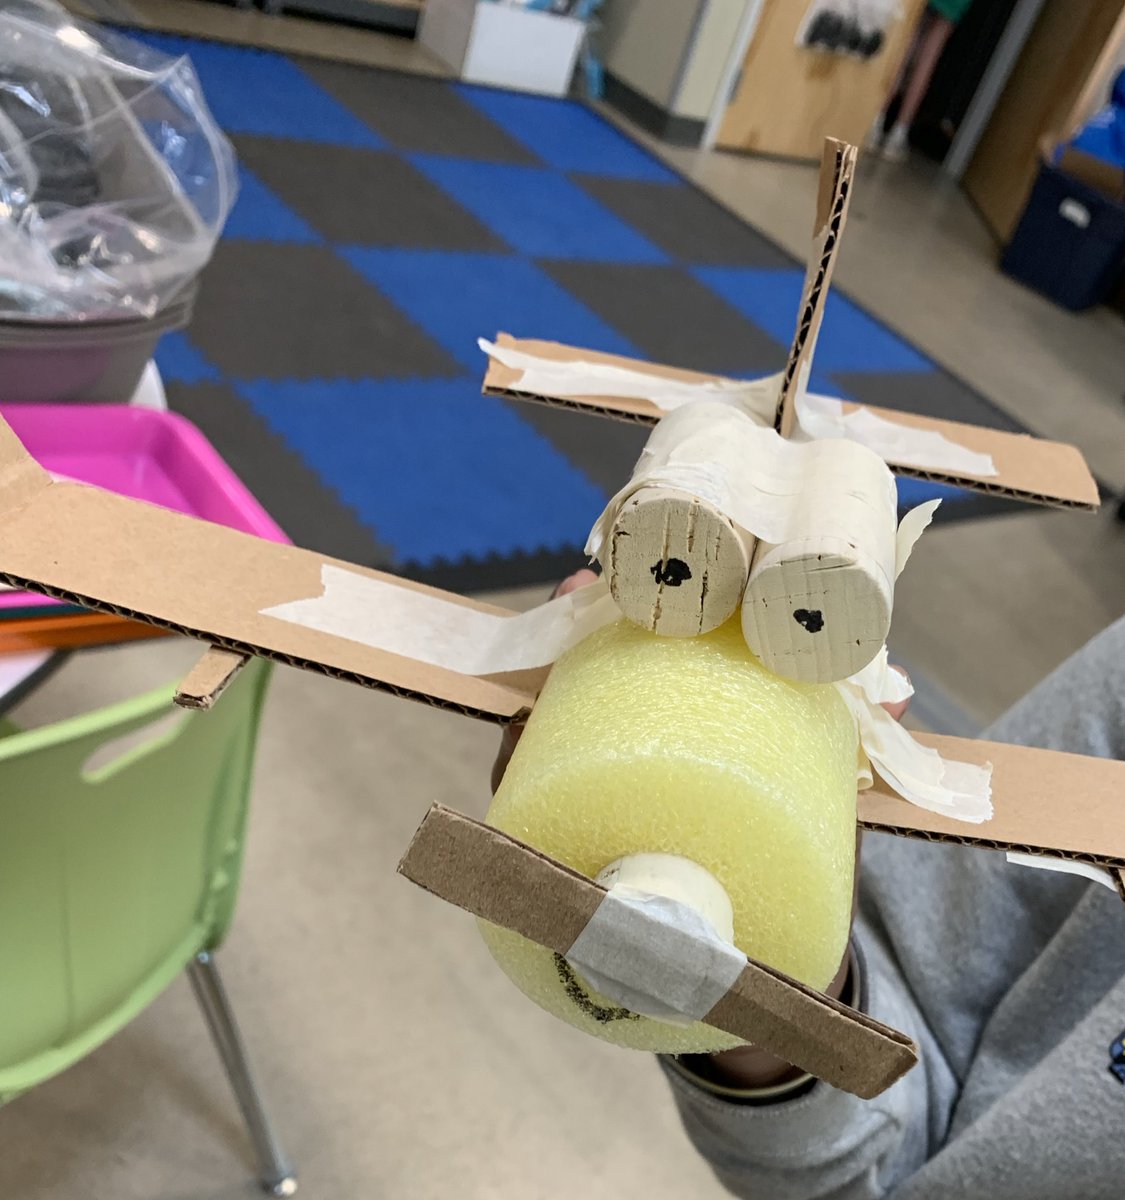 “I wish I could freeze time so I can work on this forever...” said a student during Tinker Thursday lunch club. ... #usdLearns #carltonUSD #MakerSpace #cardboardcreations